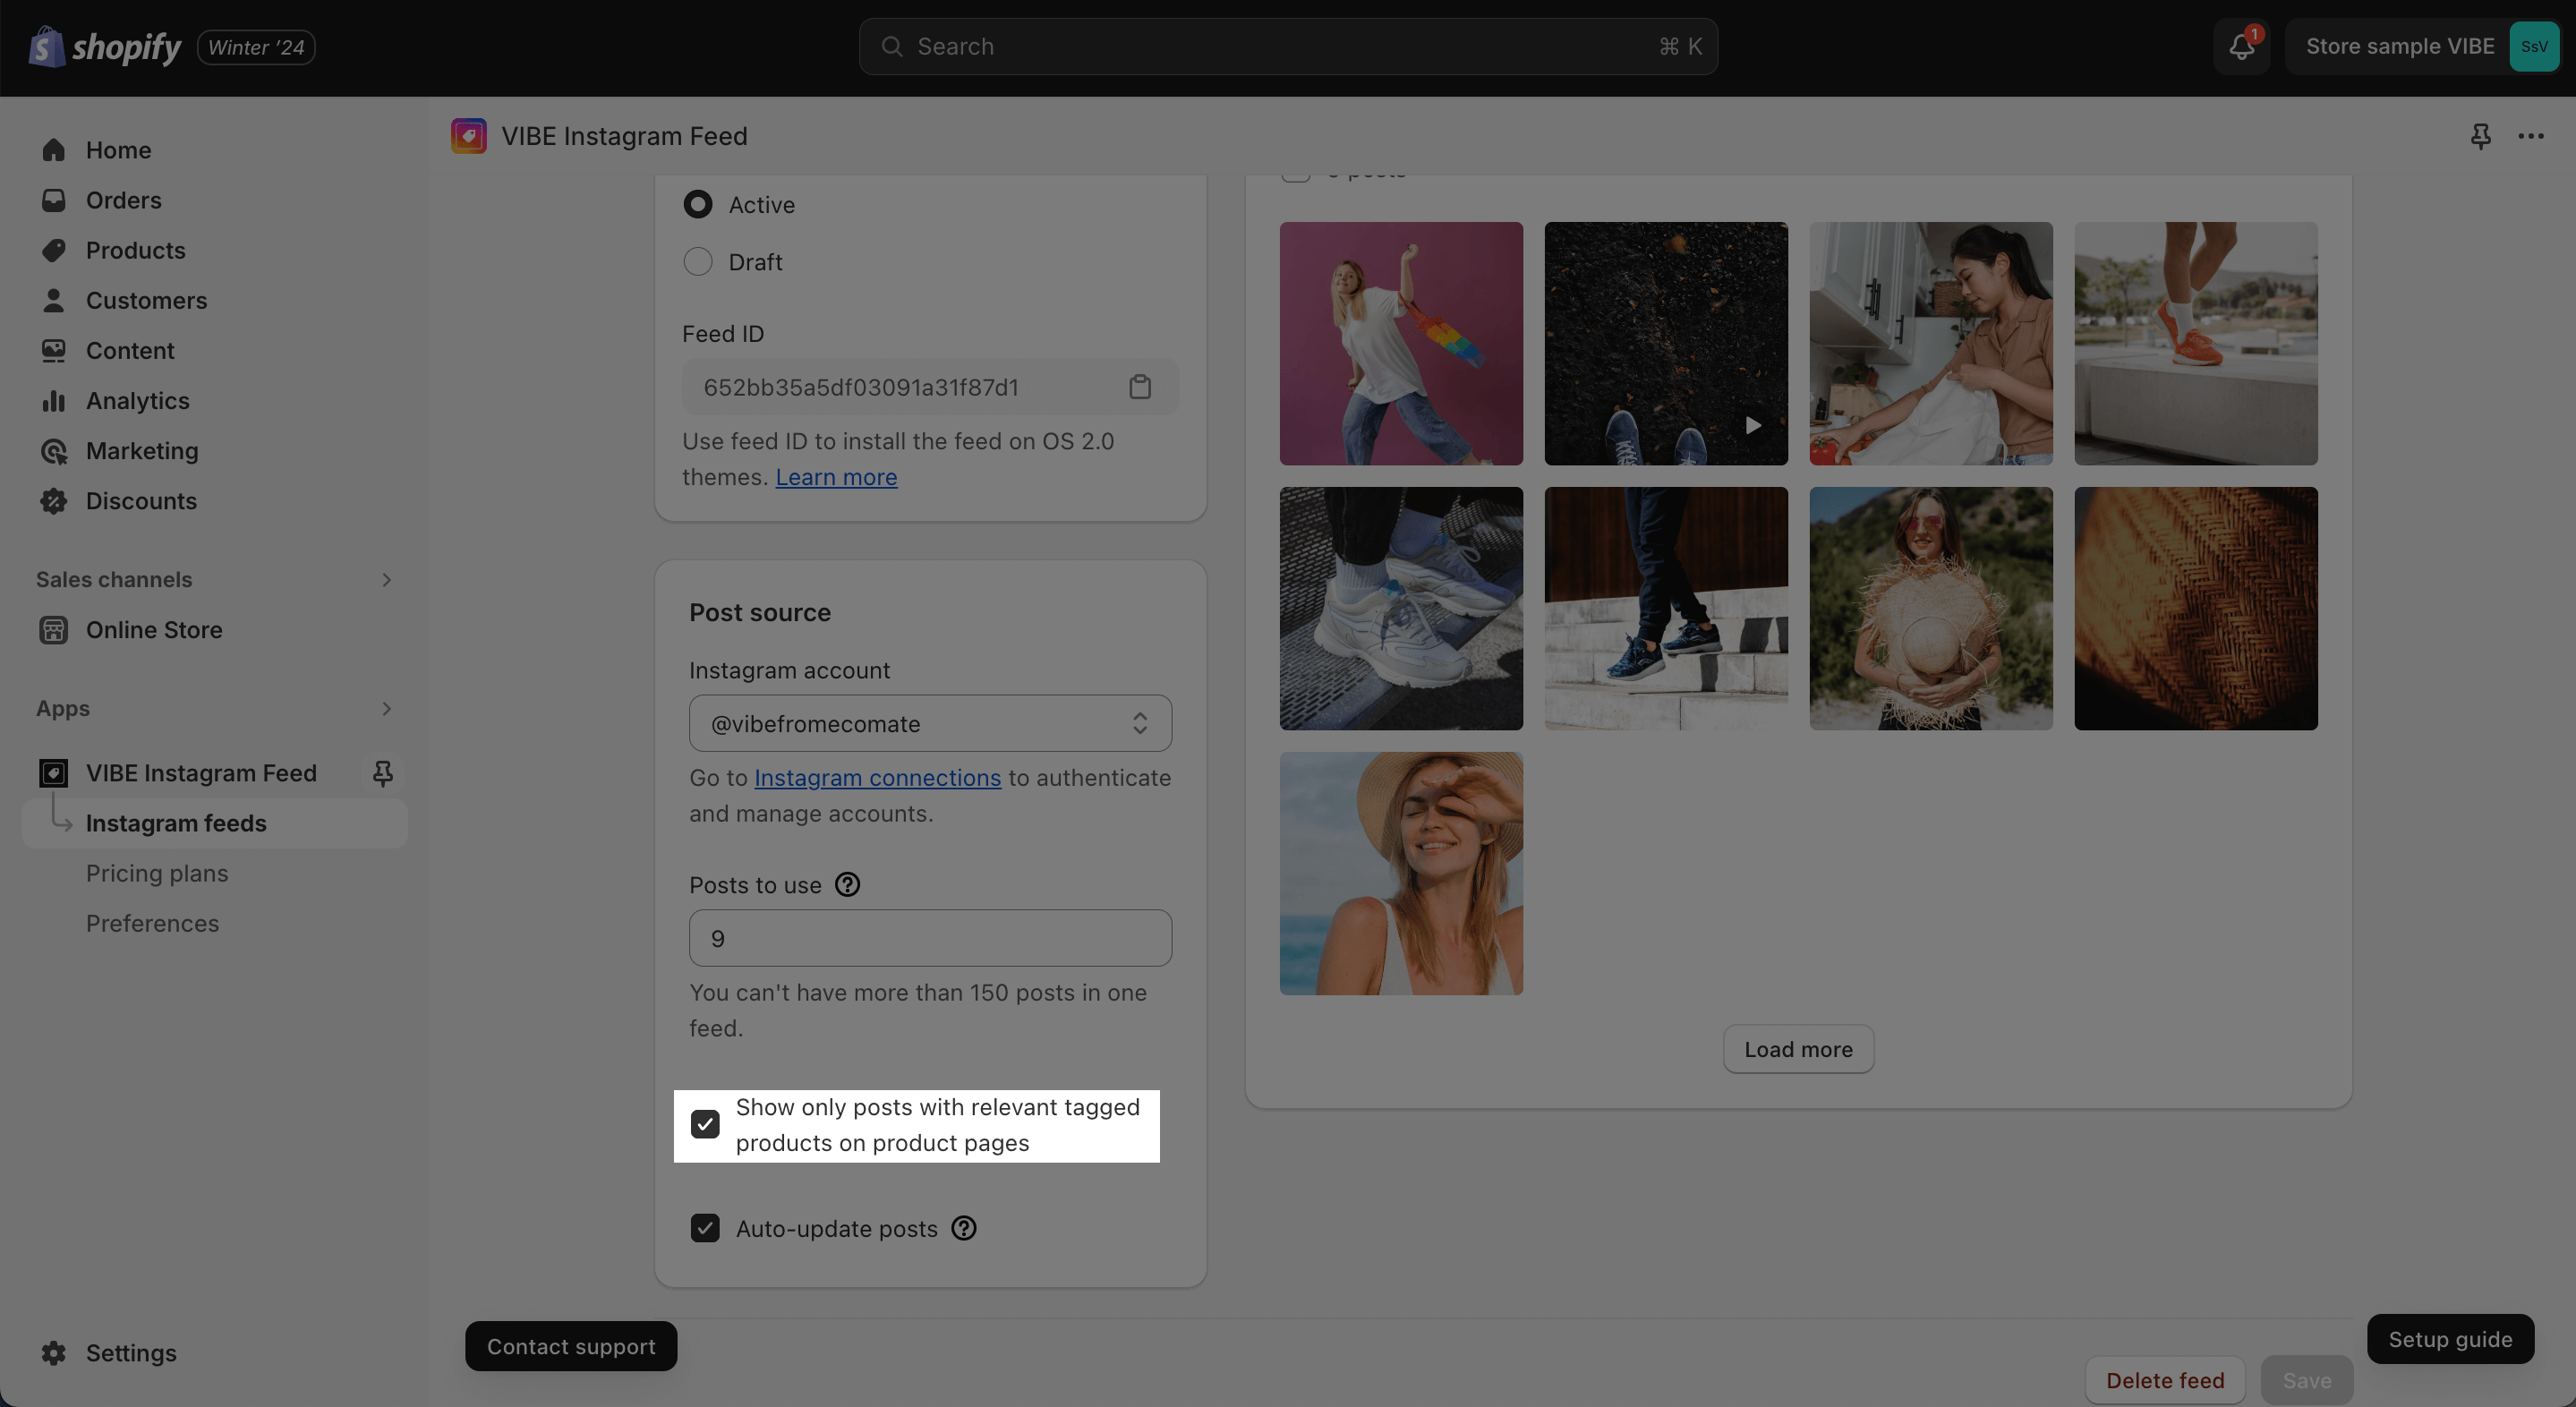 Show only posts with relevant tagged products on product pages